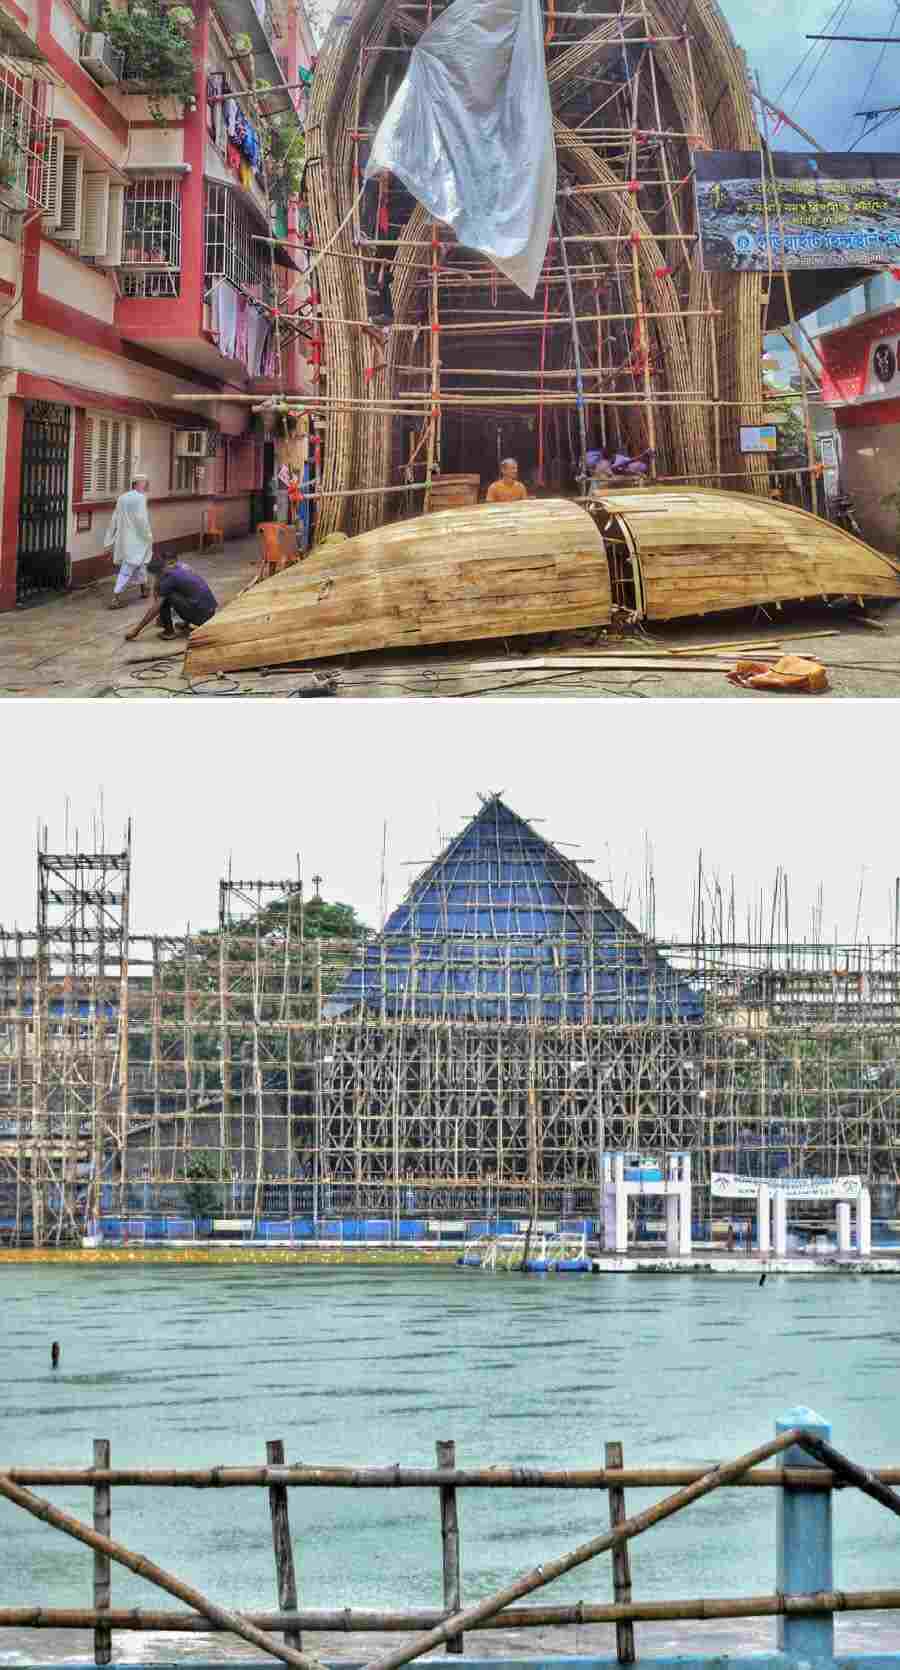 Labourers working against time at Durga Puja pandals at Hindustan Club Durga Puja and College Square  on Tuesday 